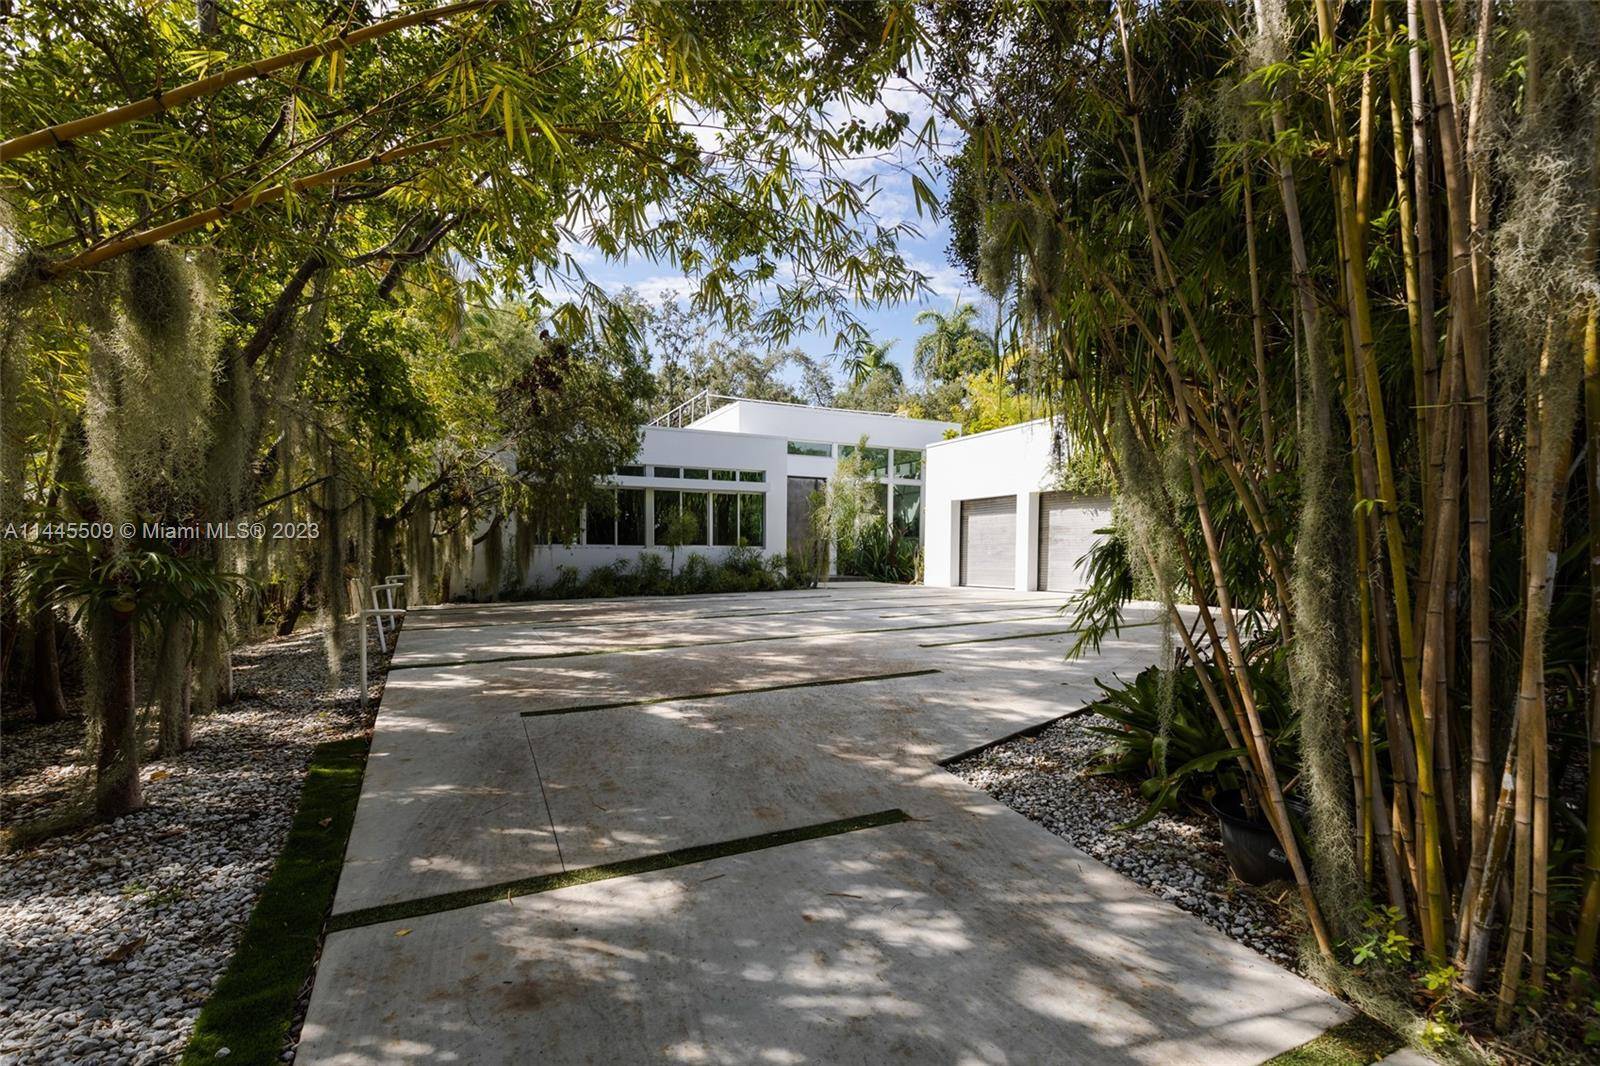 Experience the pinnacle of luxury living in this remarkable single story home in the prestigious Coconut Grove neighborhood.